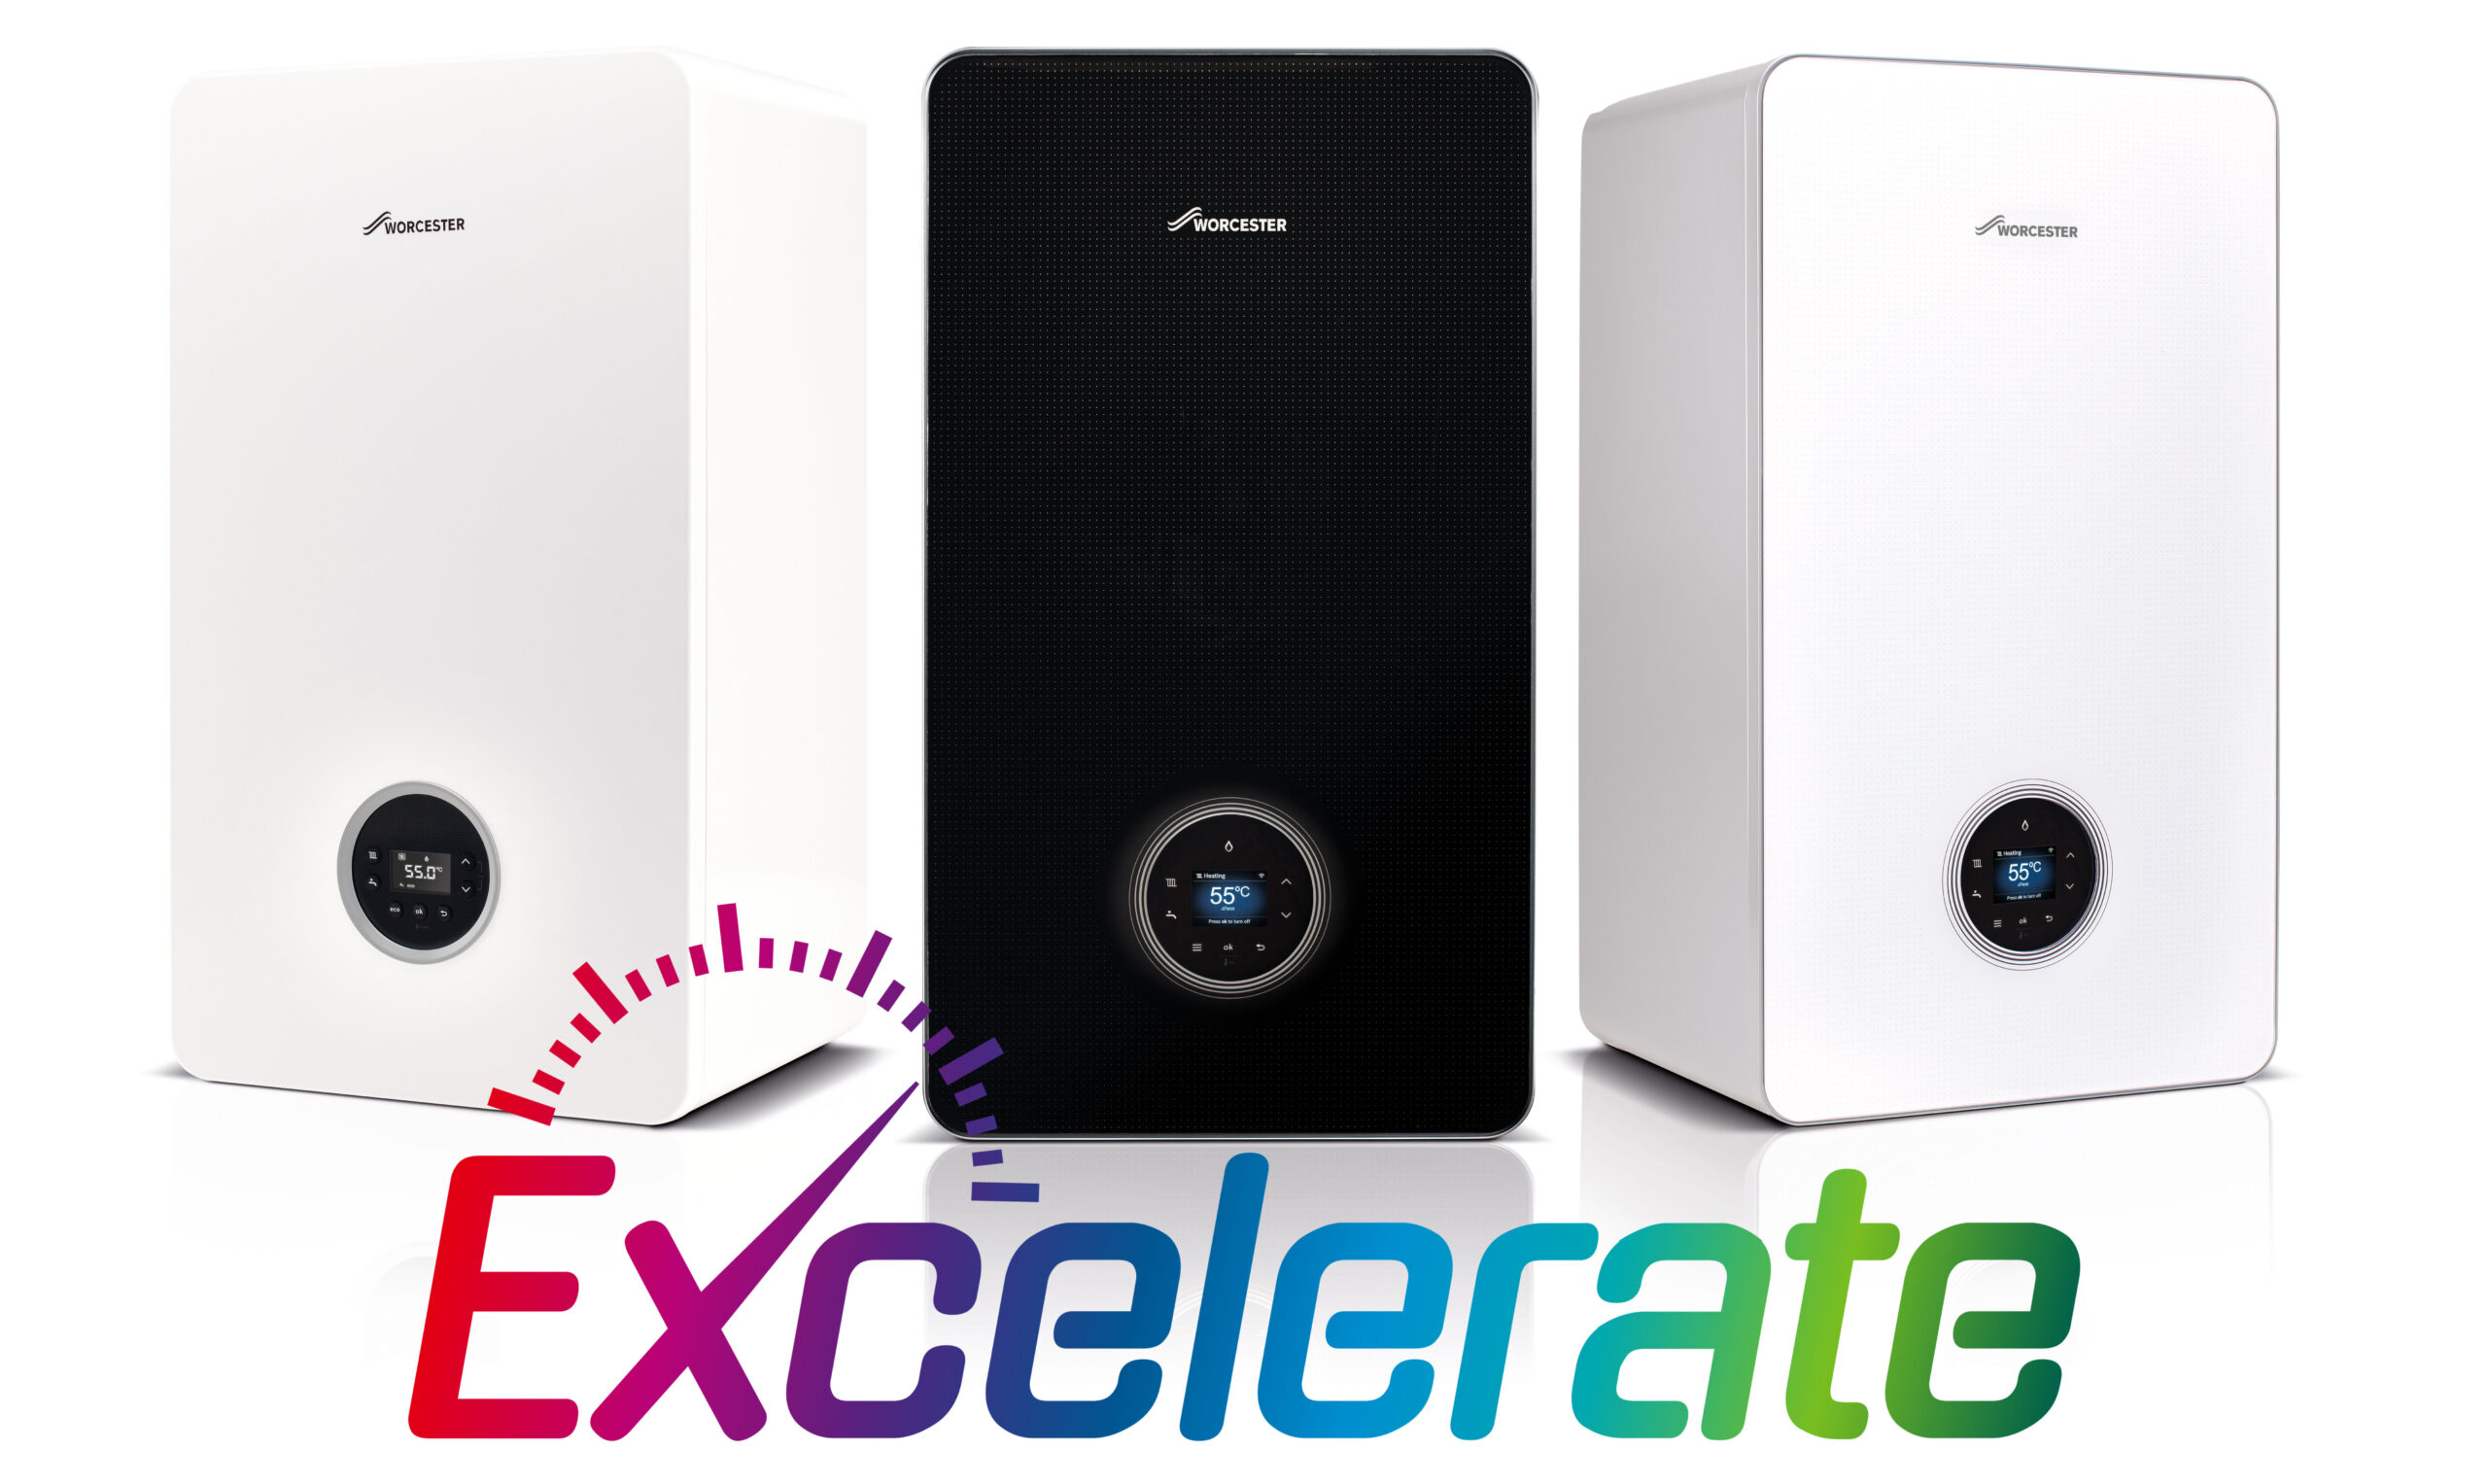 Worcester Bosch’s new loyalty scheme, Excelerate, poised to ‘supercharge’ installers’ businesses @WorcesterBosch